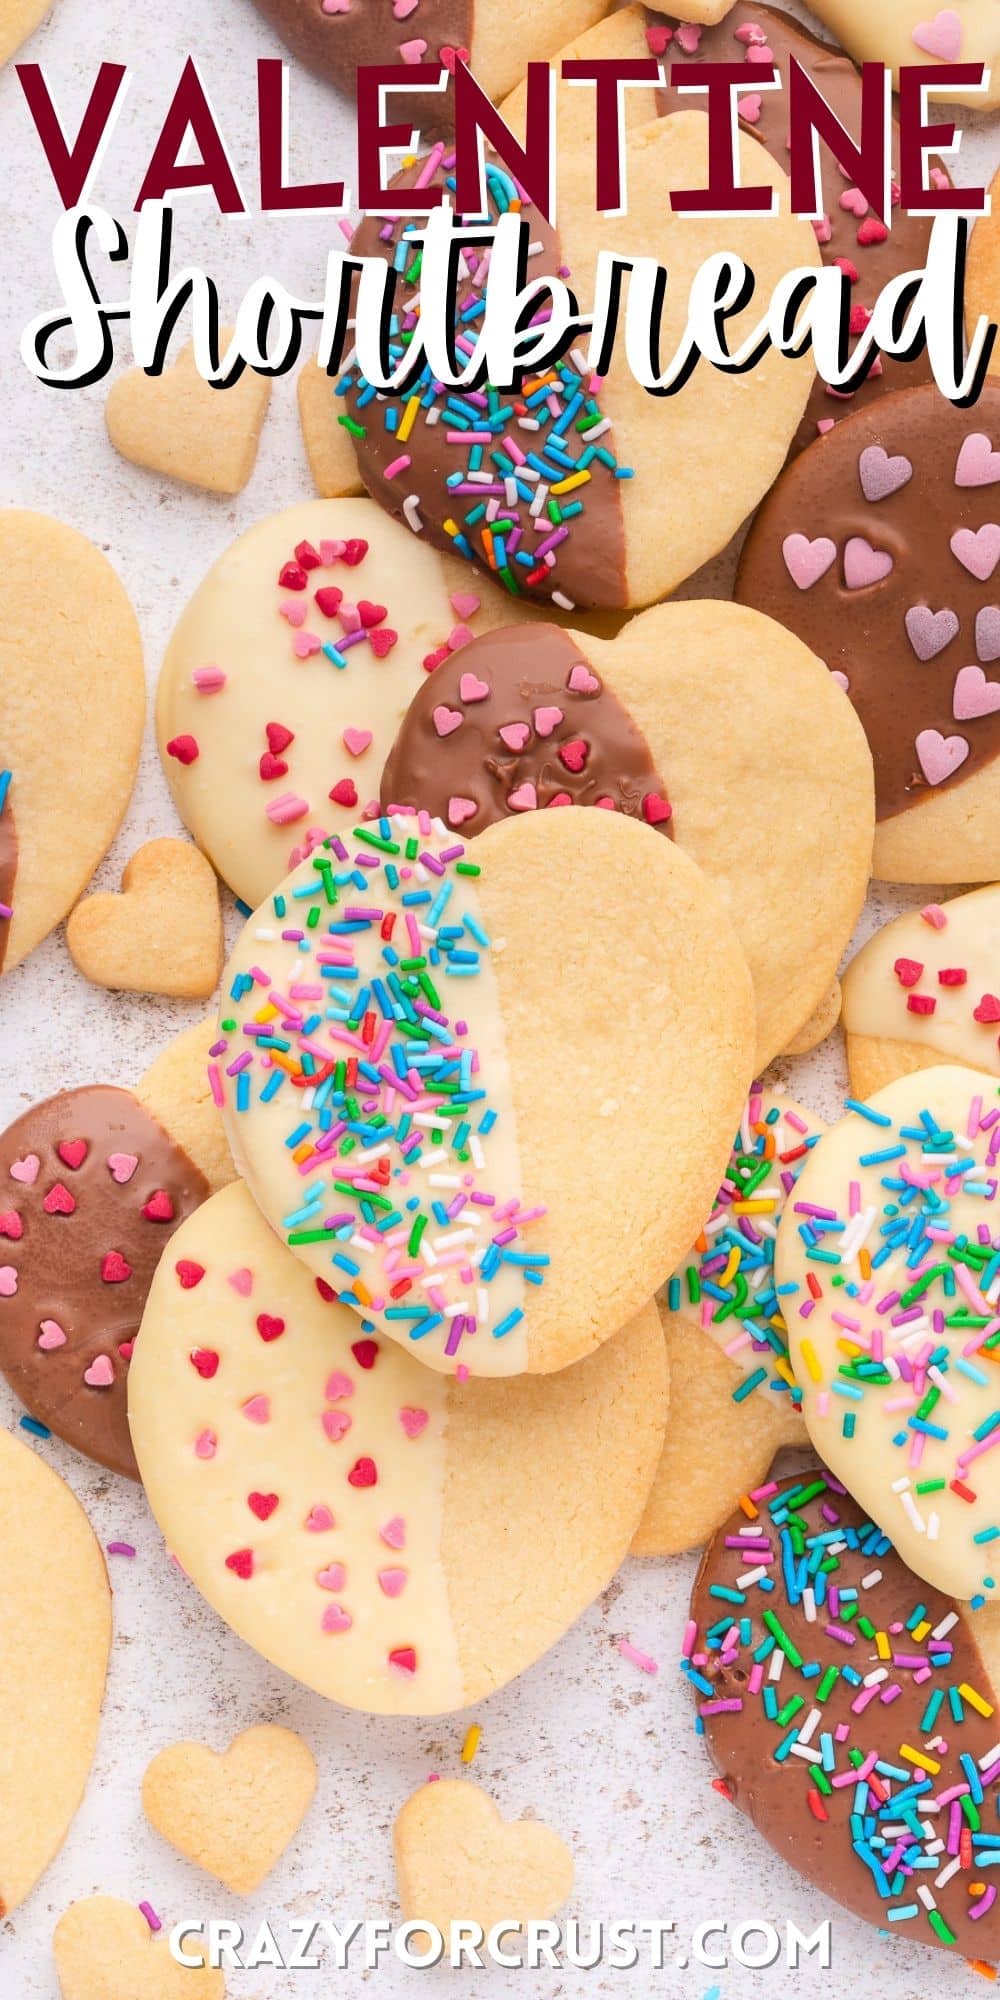 heart shaped cookies half covered in chocolate and sprinkles with words on the image.